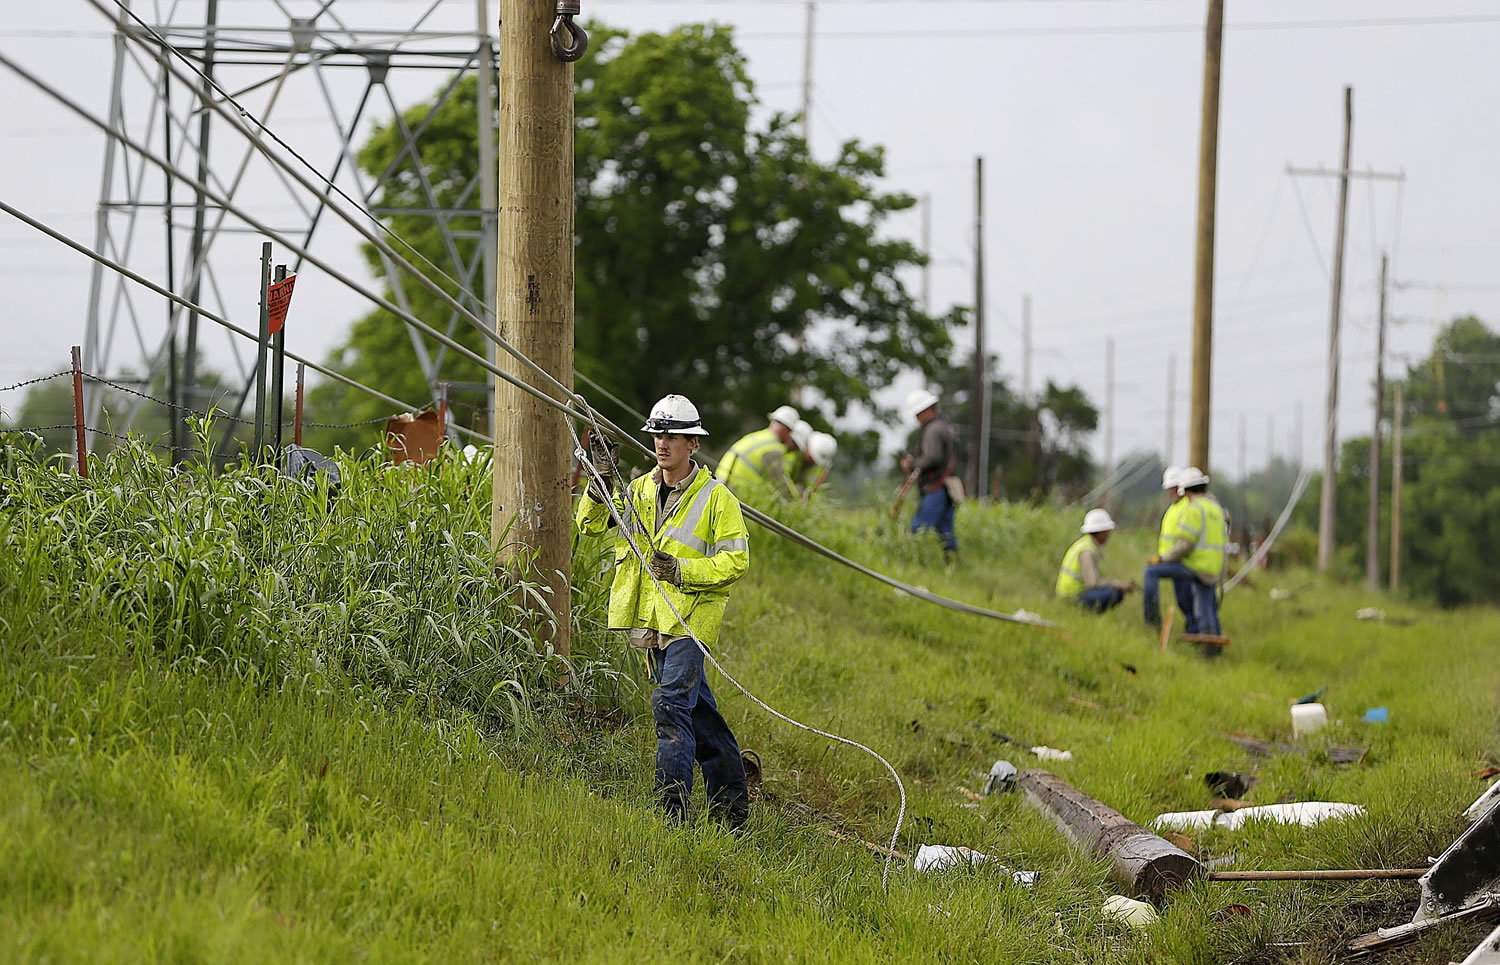 Utility crews work on downed lines Sunday after a strong storm hit the area Saturday night and early Sunday morning, in Broken Arrow, Okla.